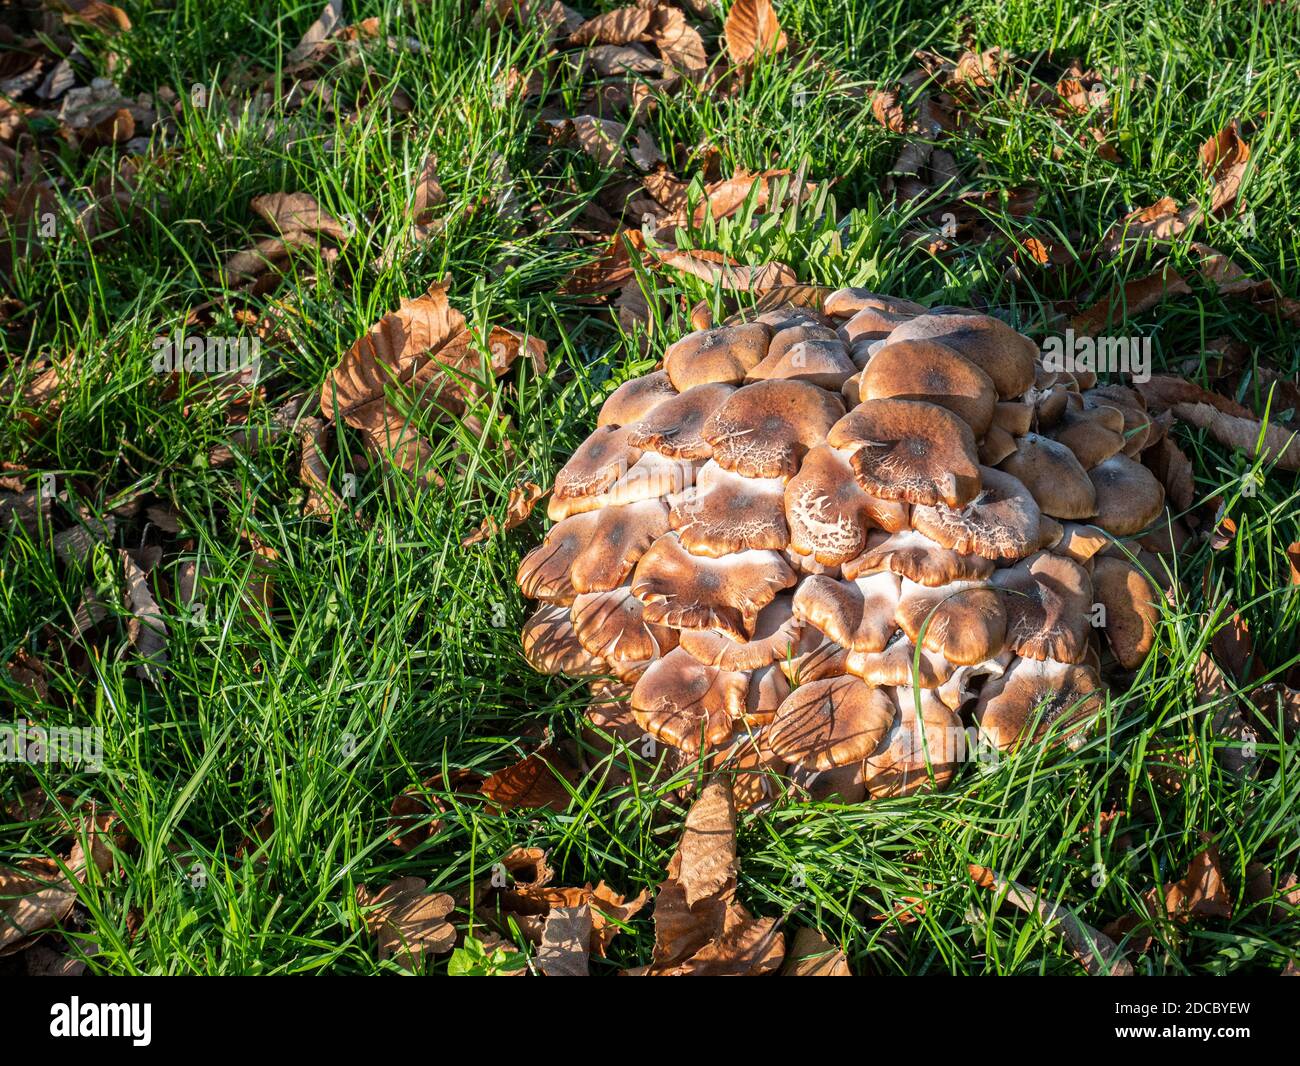 Honey Fungus Armillaria ostoyae growing on the roots of Chestnut and Oak trees in roadside parkland Stock Photo